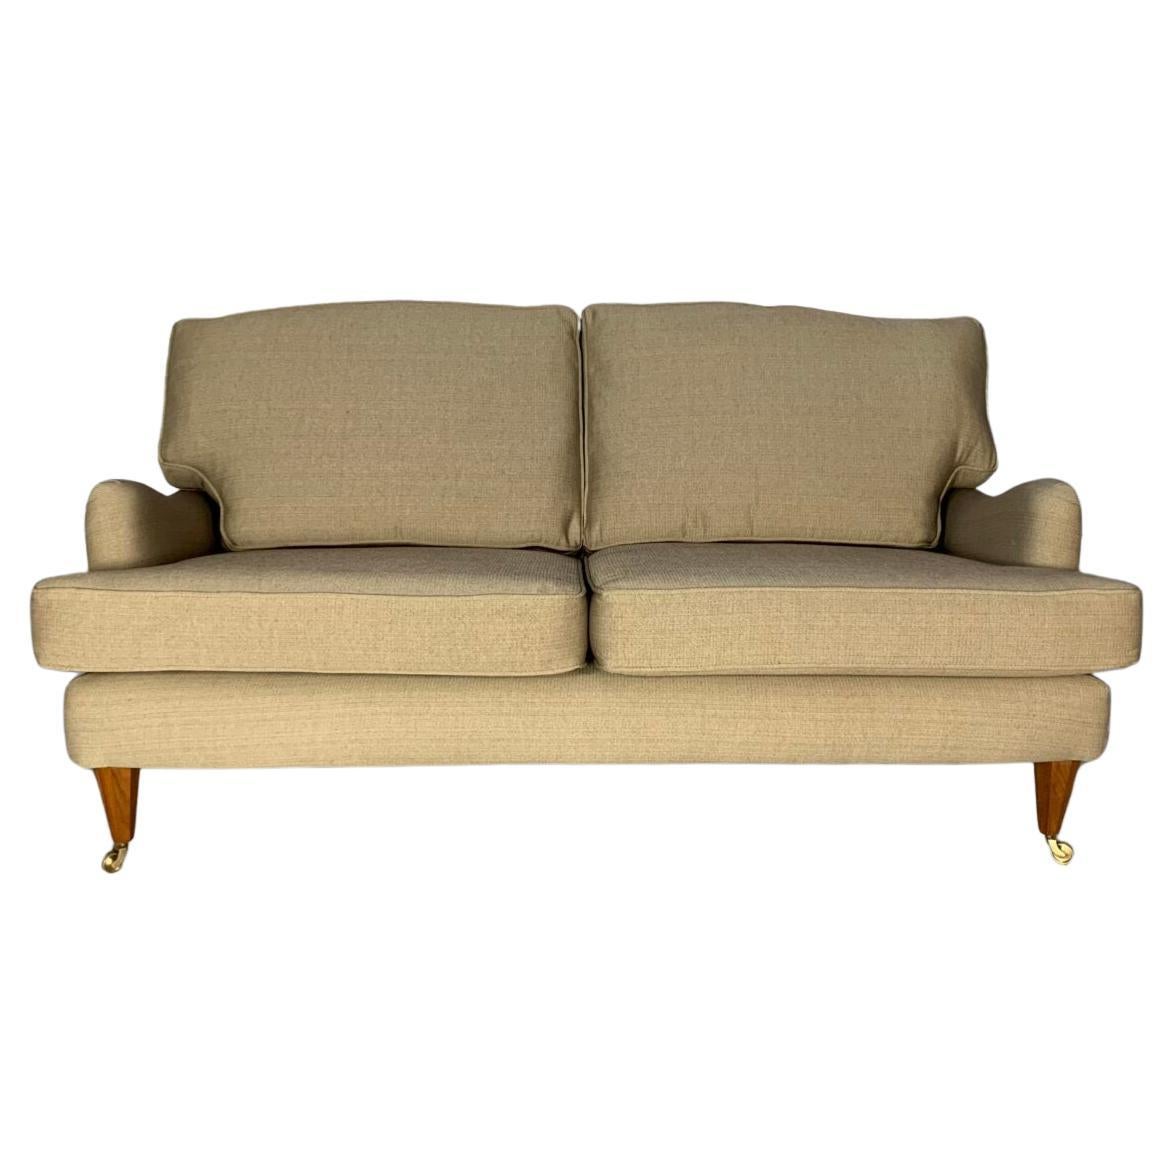 Linley 2.5-Seat Howard-Design Sofa - In Woven Gold Fabric For Sale